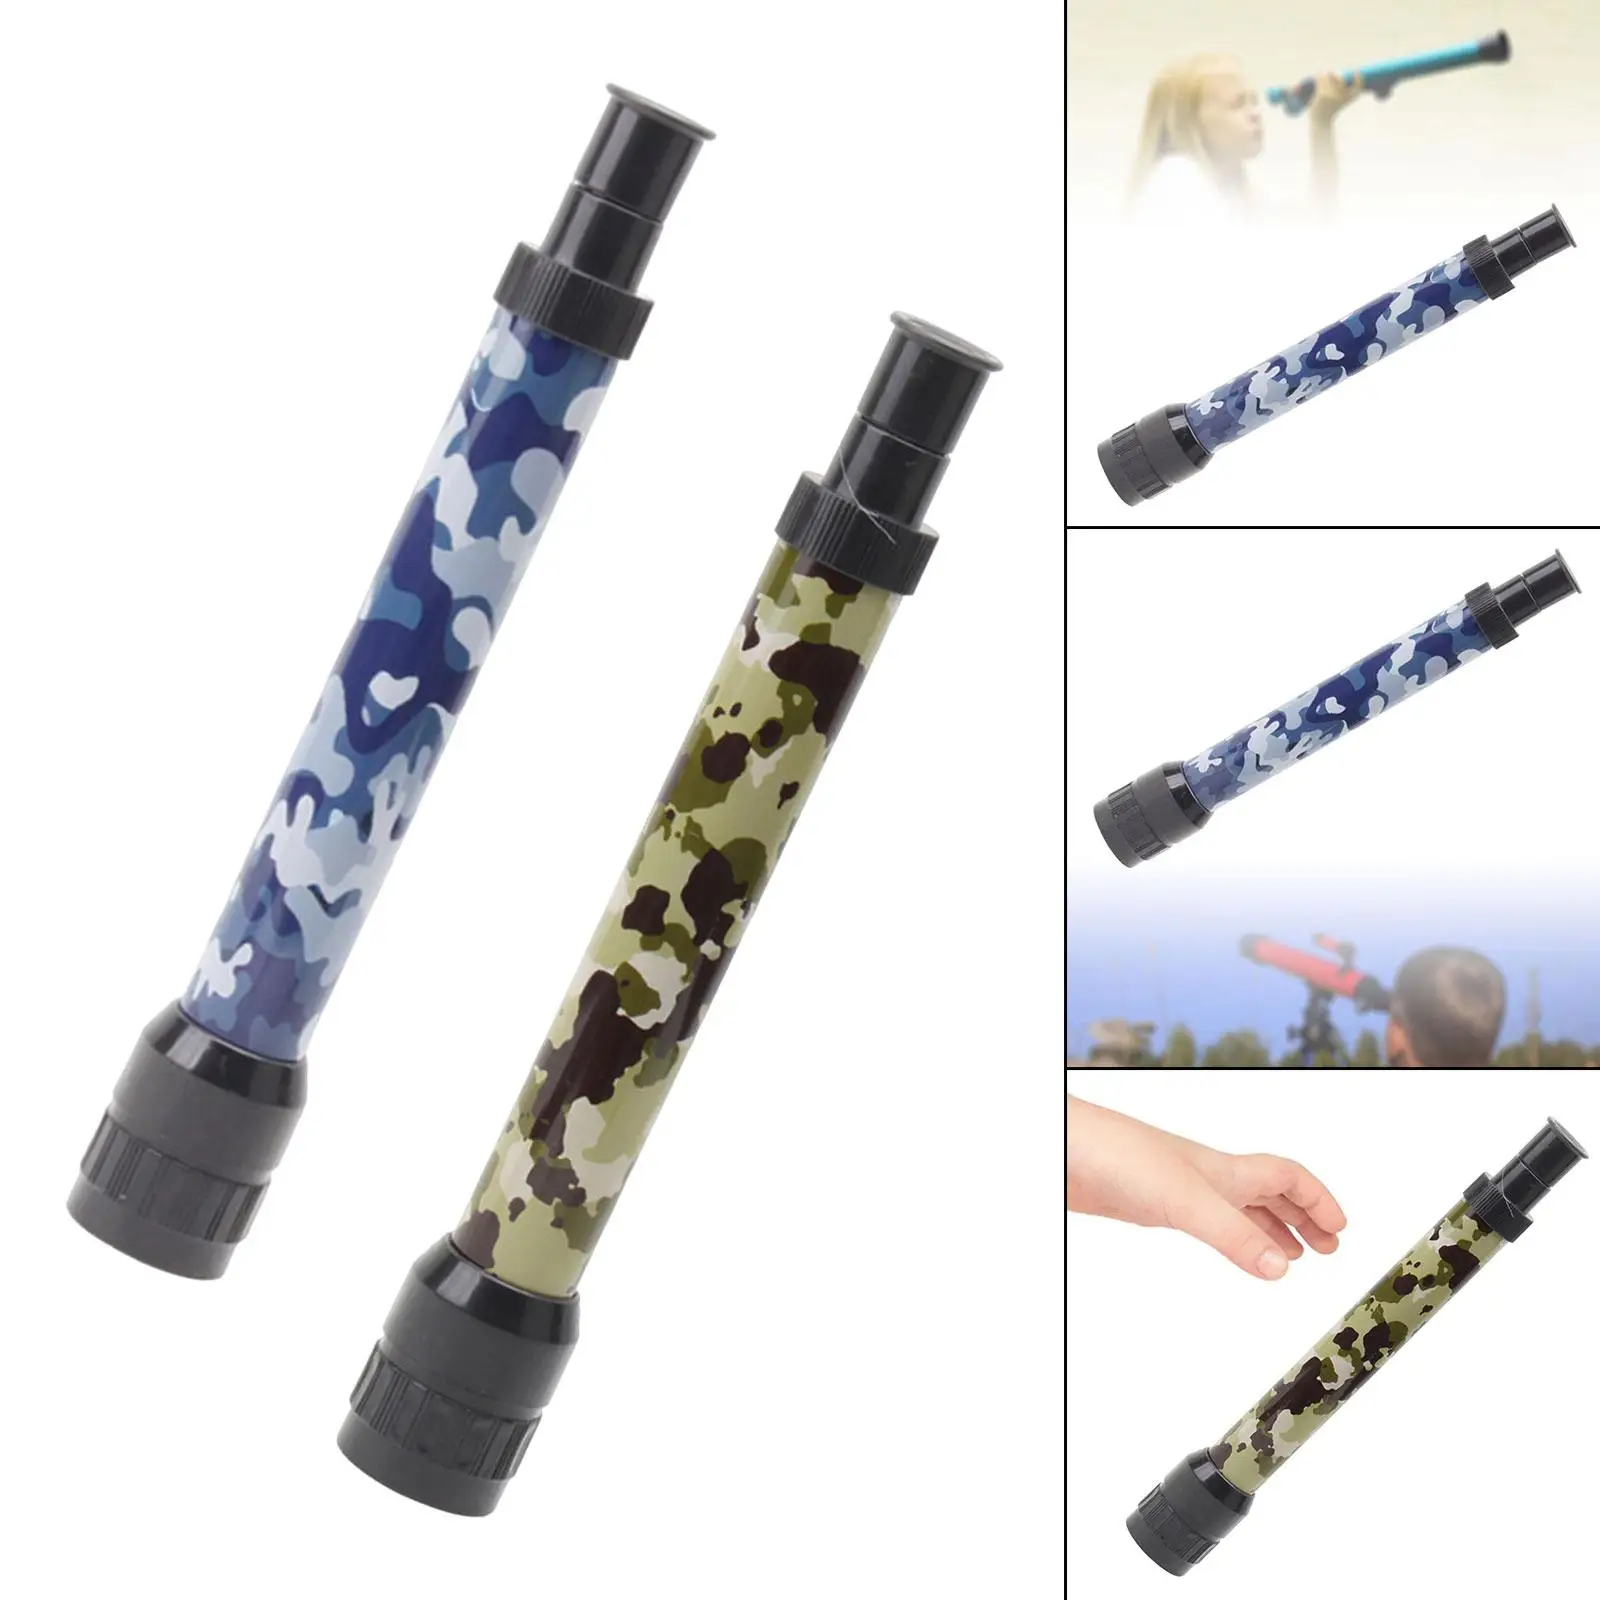 Telescopic Spyglass Science High Resolution Children Magnification Toy for Camping Hiking Party Favors Presents Birthday